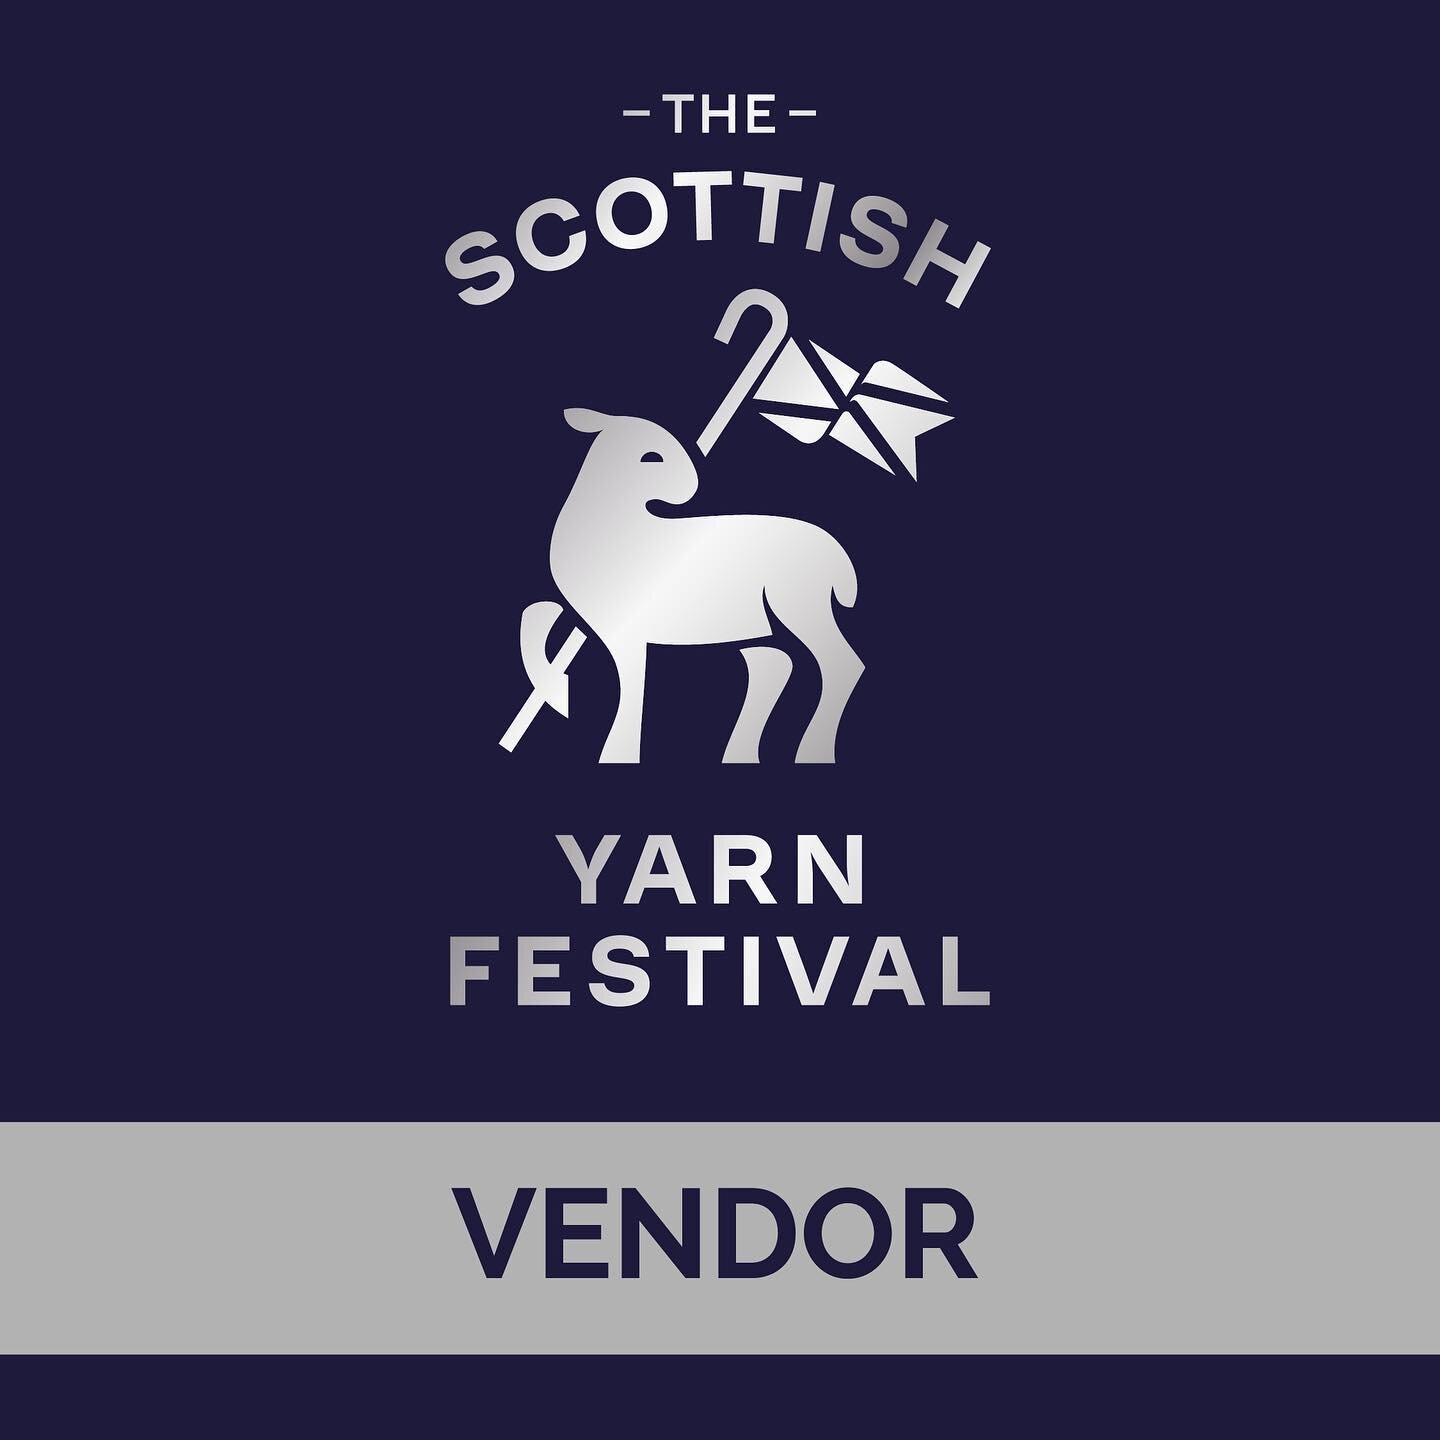 Delighted to be an exhibitor at #TheScottishYarnFestival in September. This is such a wonderful show so time to plan your trip now!